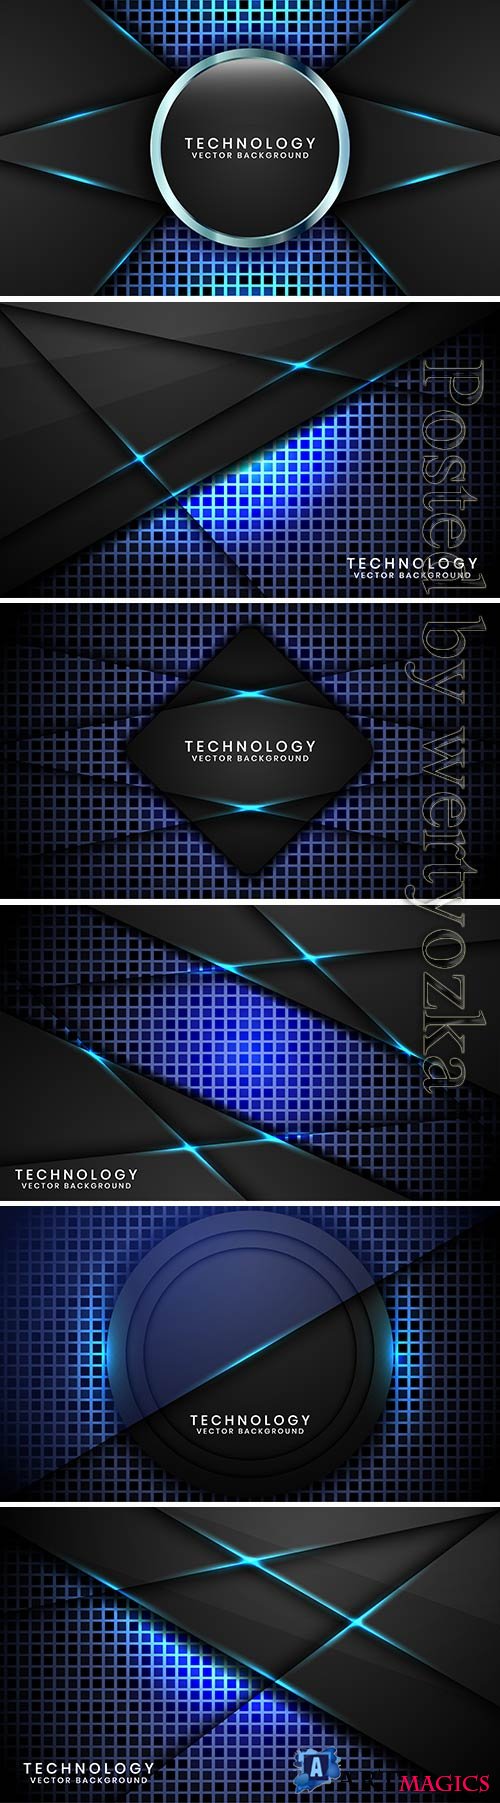 Abstract 3d black circle technology background with random square textured, overlap layers with blue light effect decoration